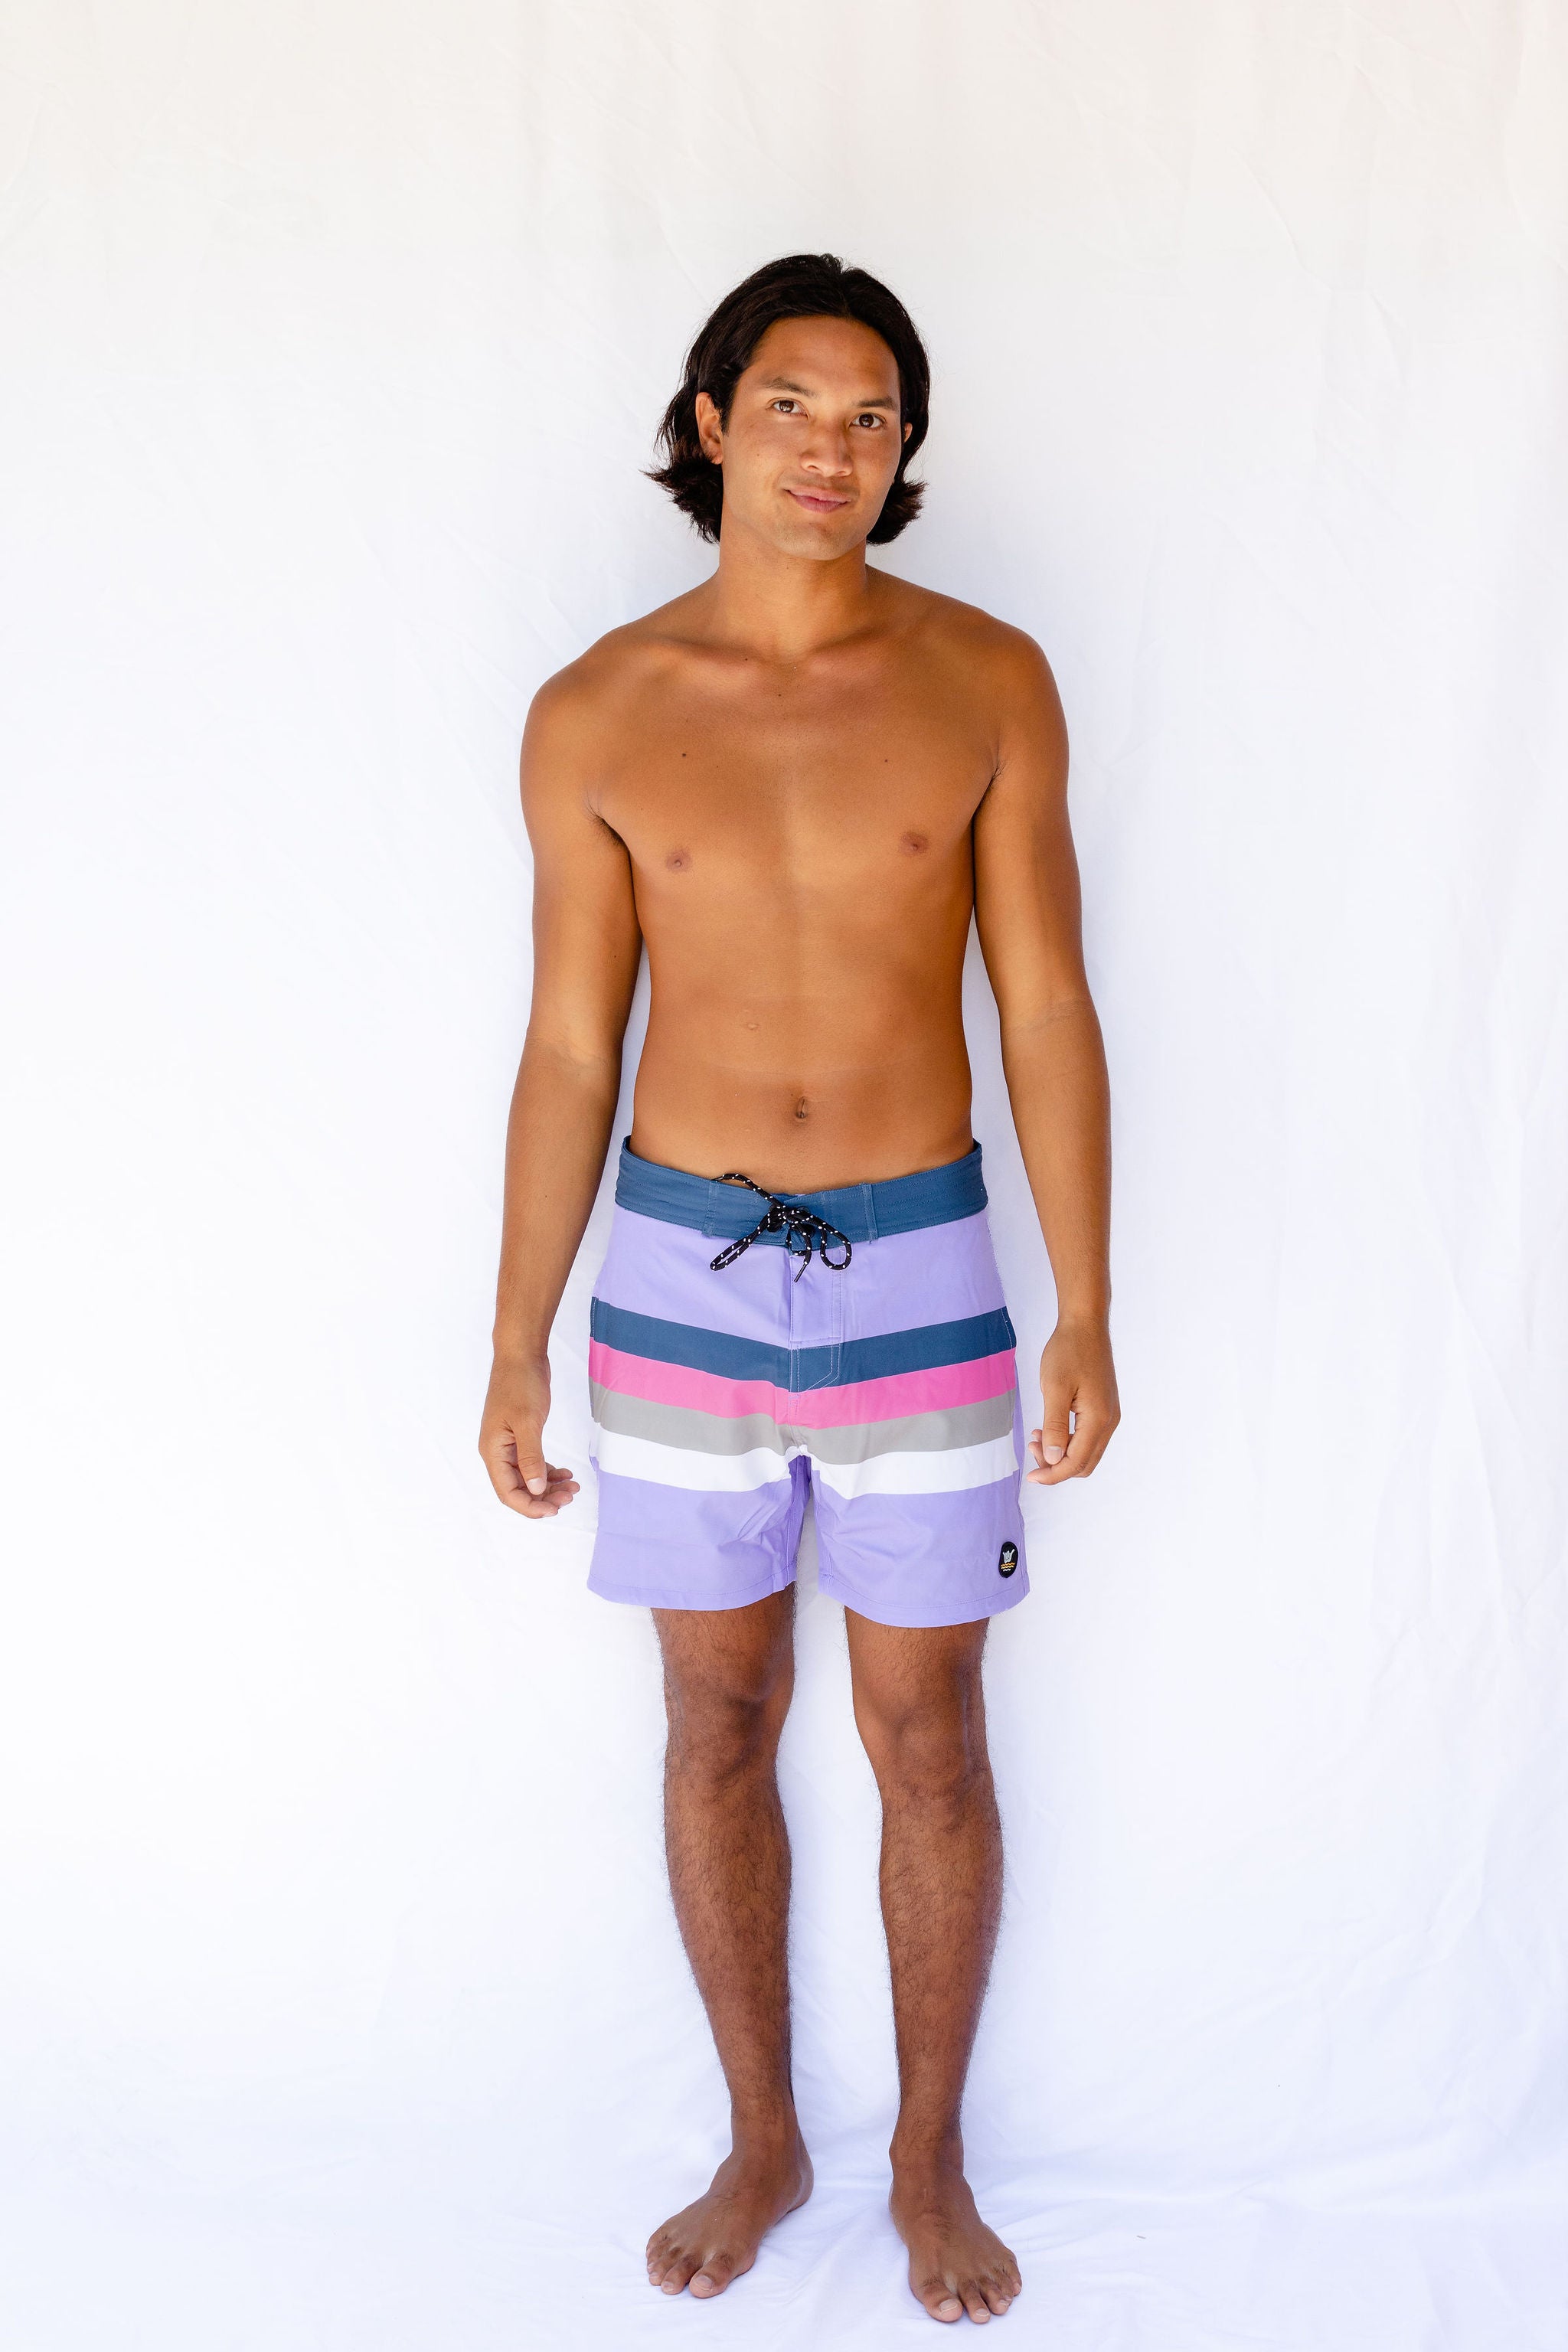 San Onofre Boardshort - Lilac Orchid - Hang Loose